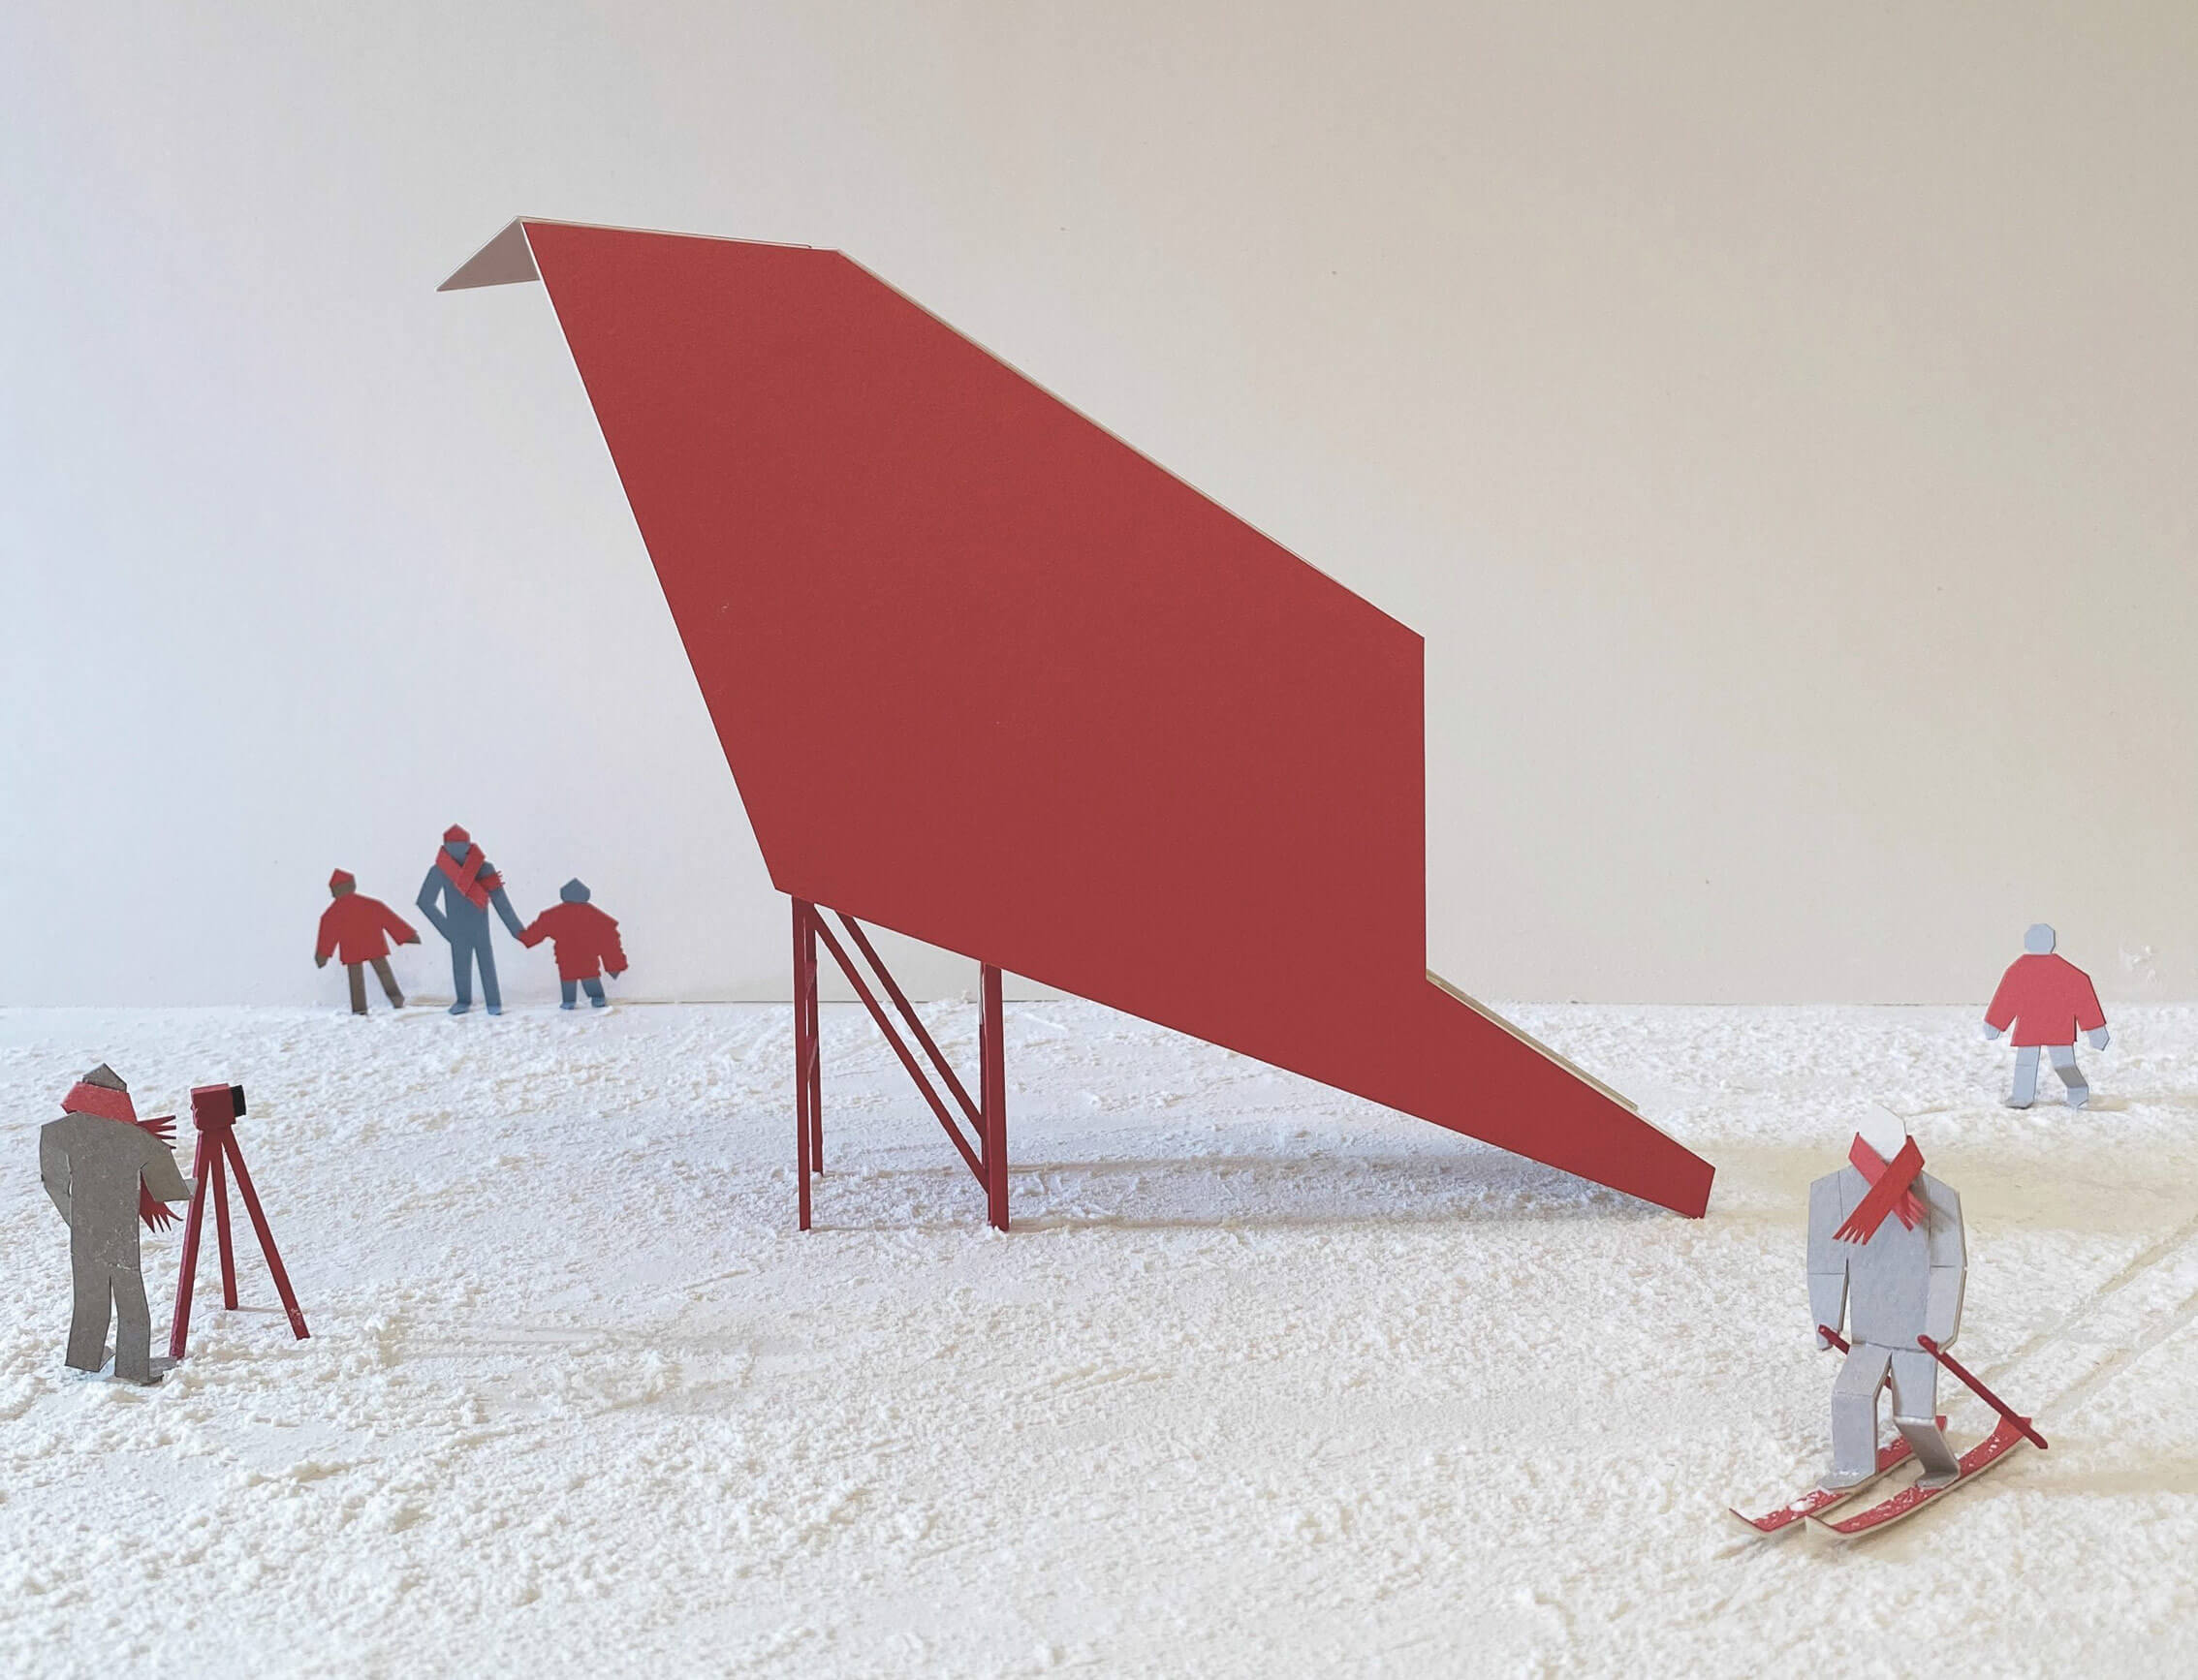 an angular red structure on a snowy beach